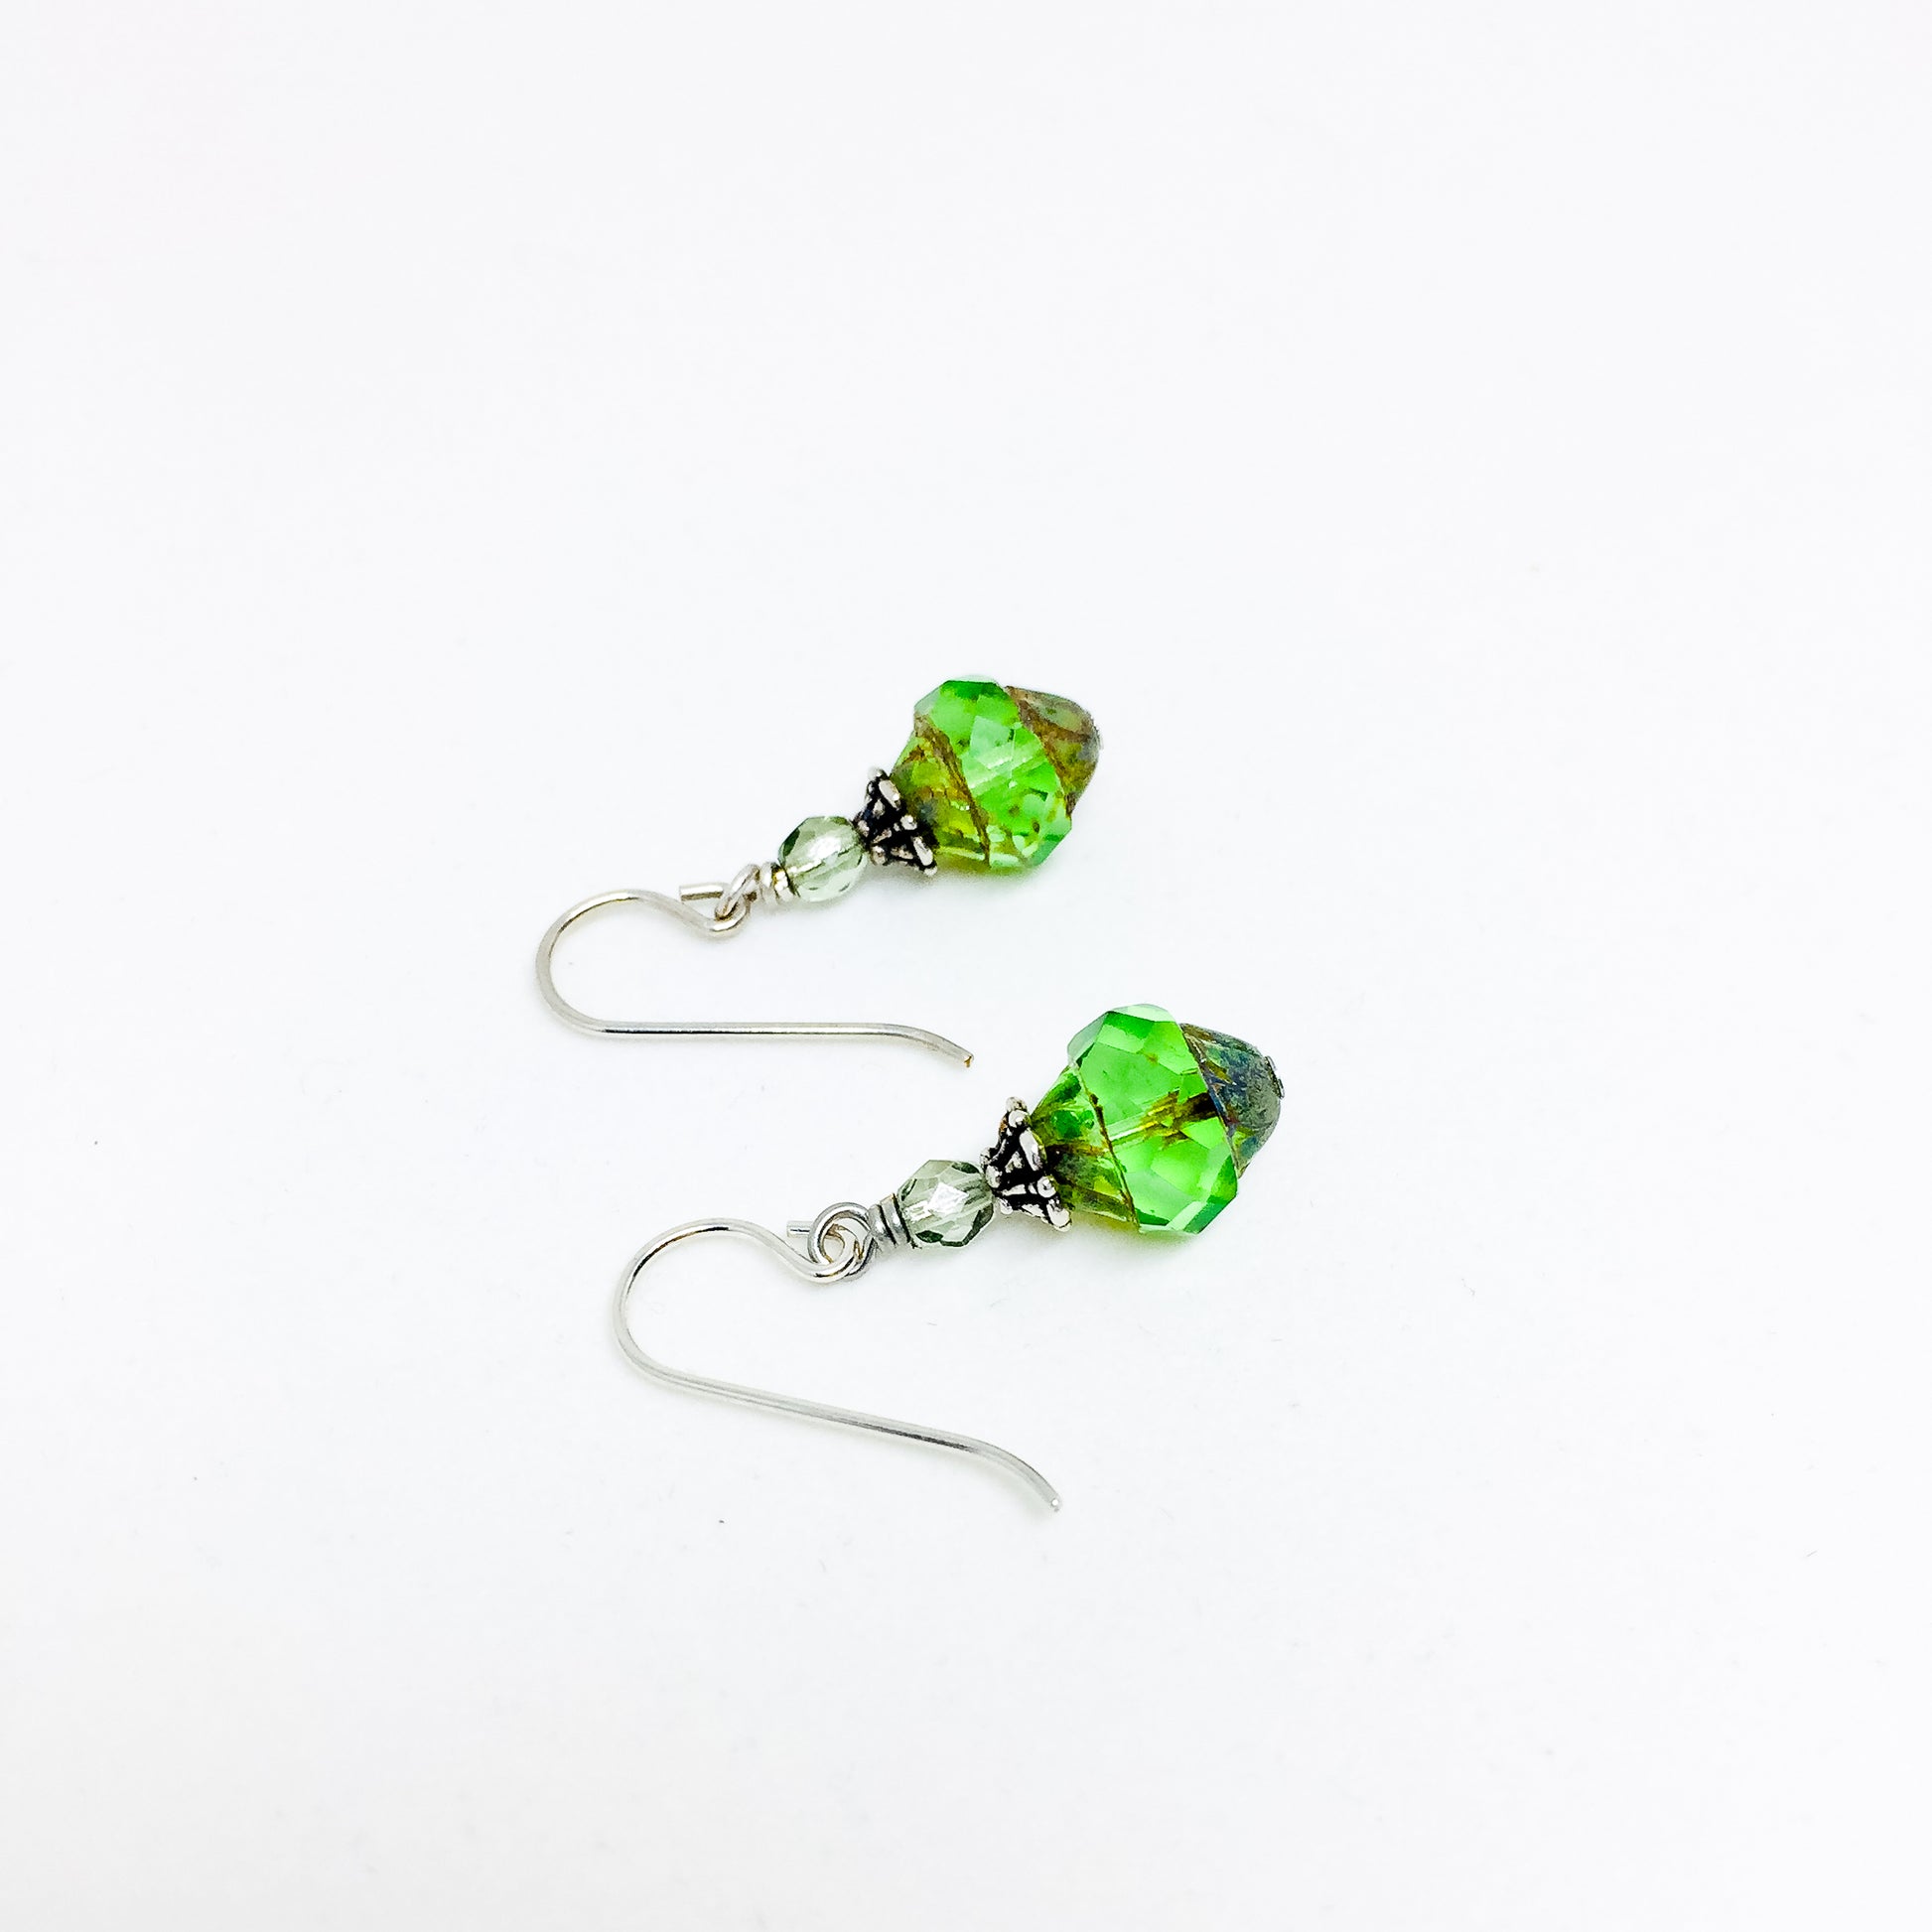 Czech glass earrings cathedral faceted band peridot